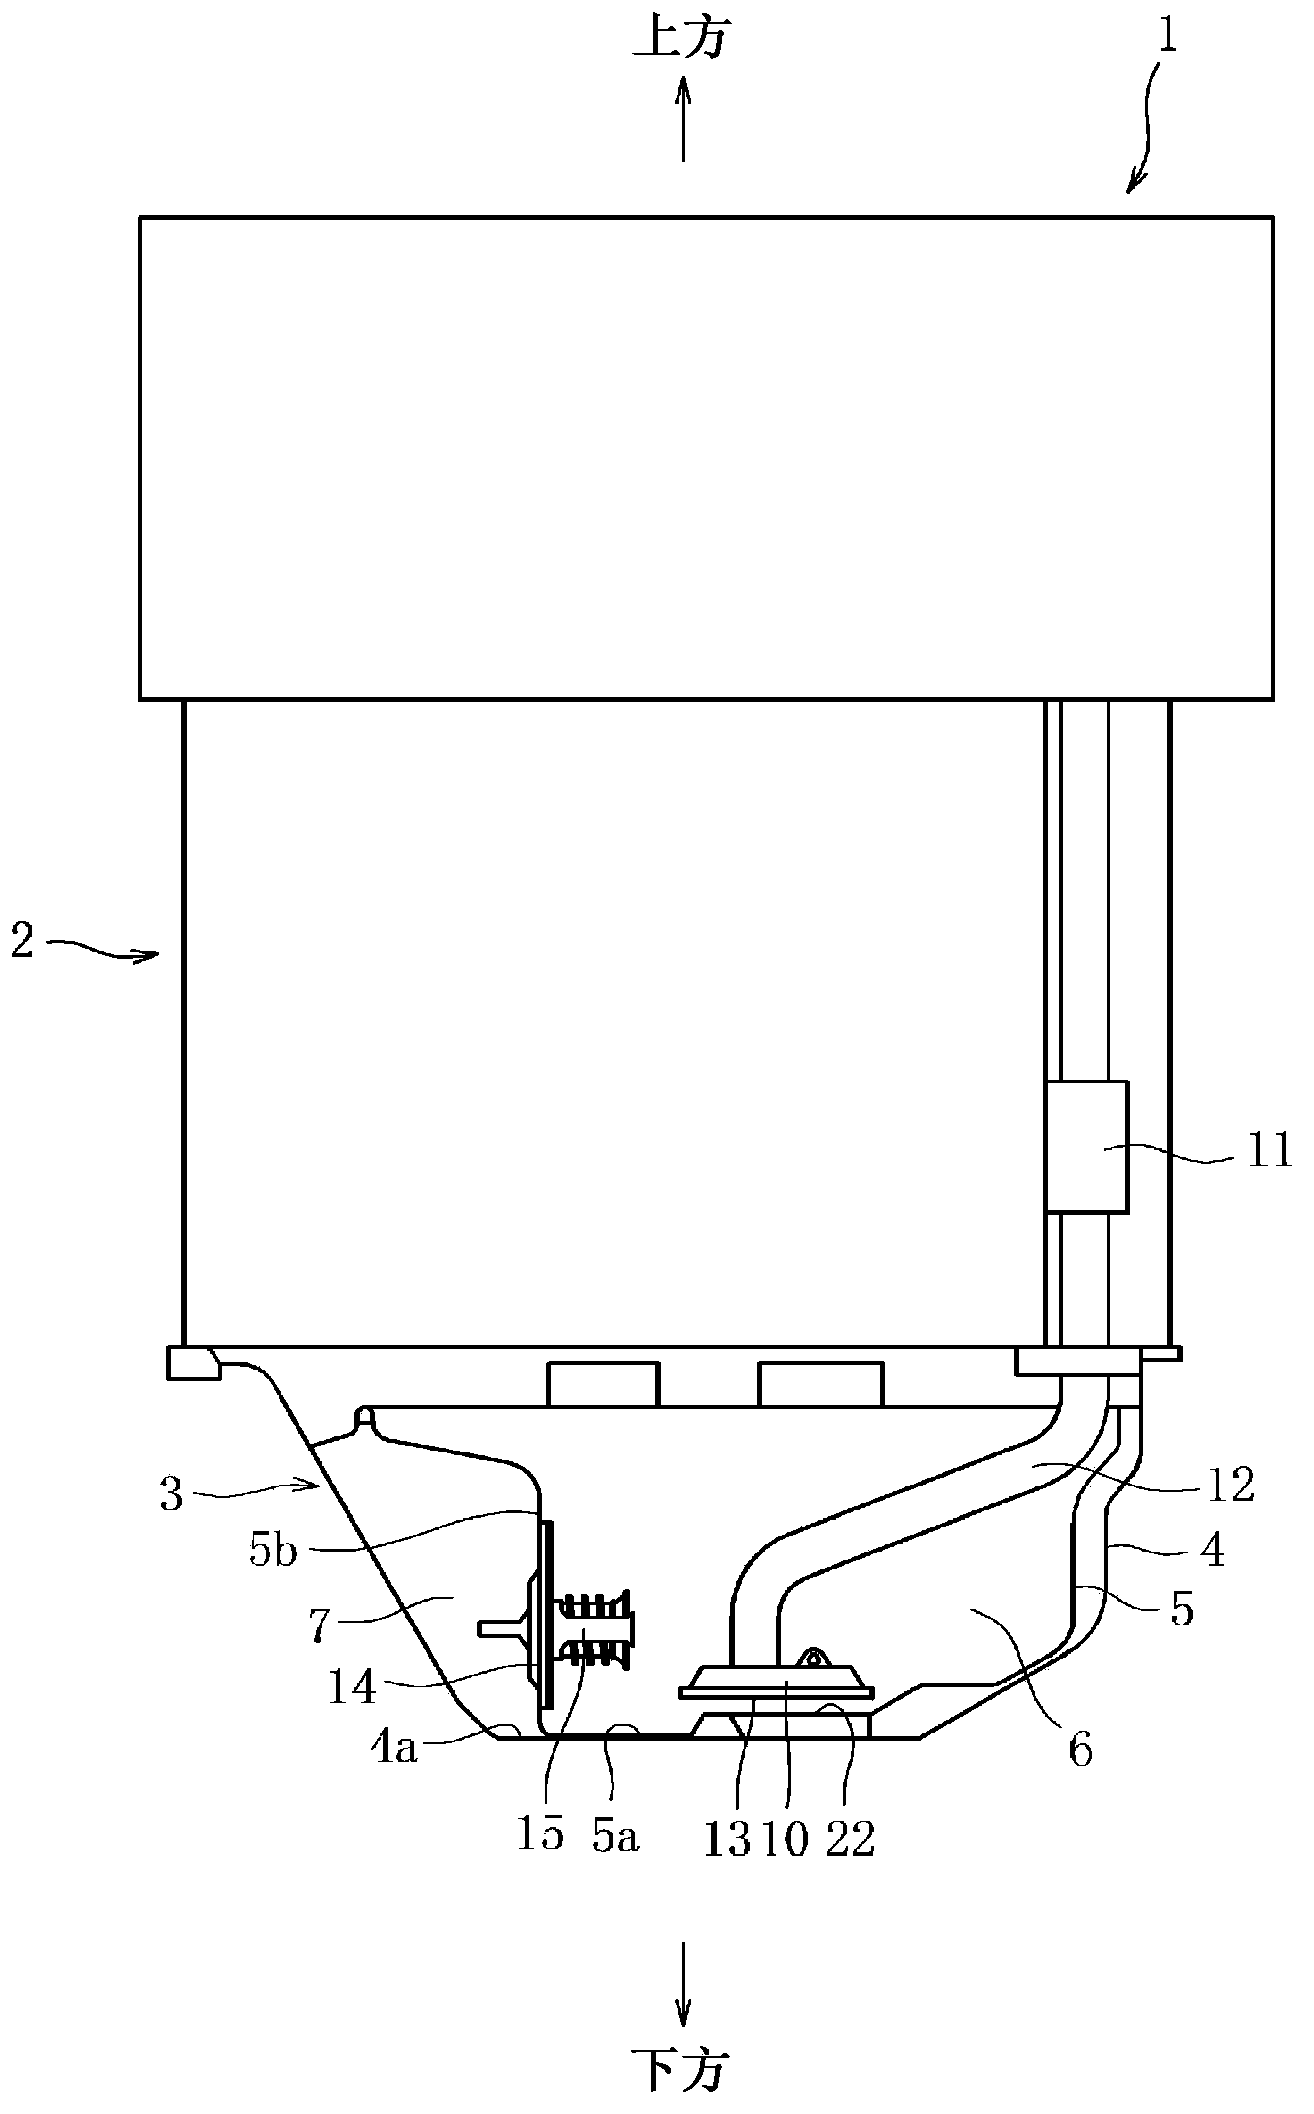 Oil pan structure of engine